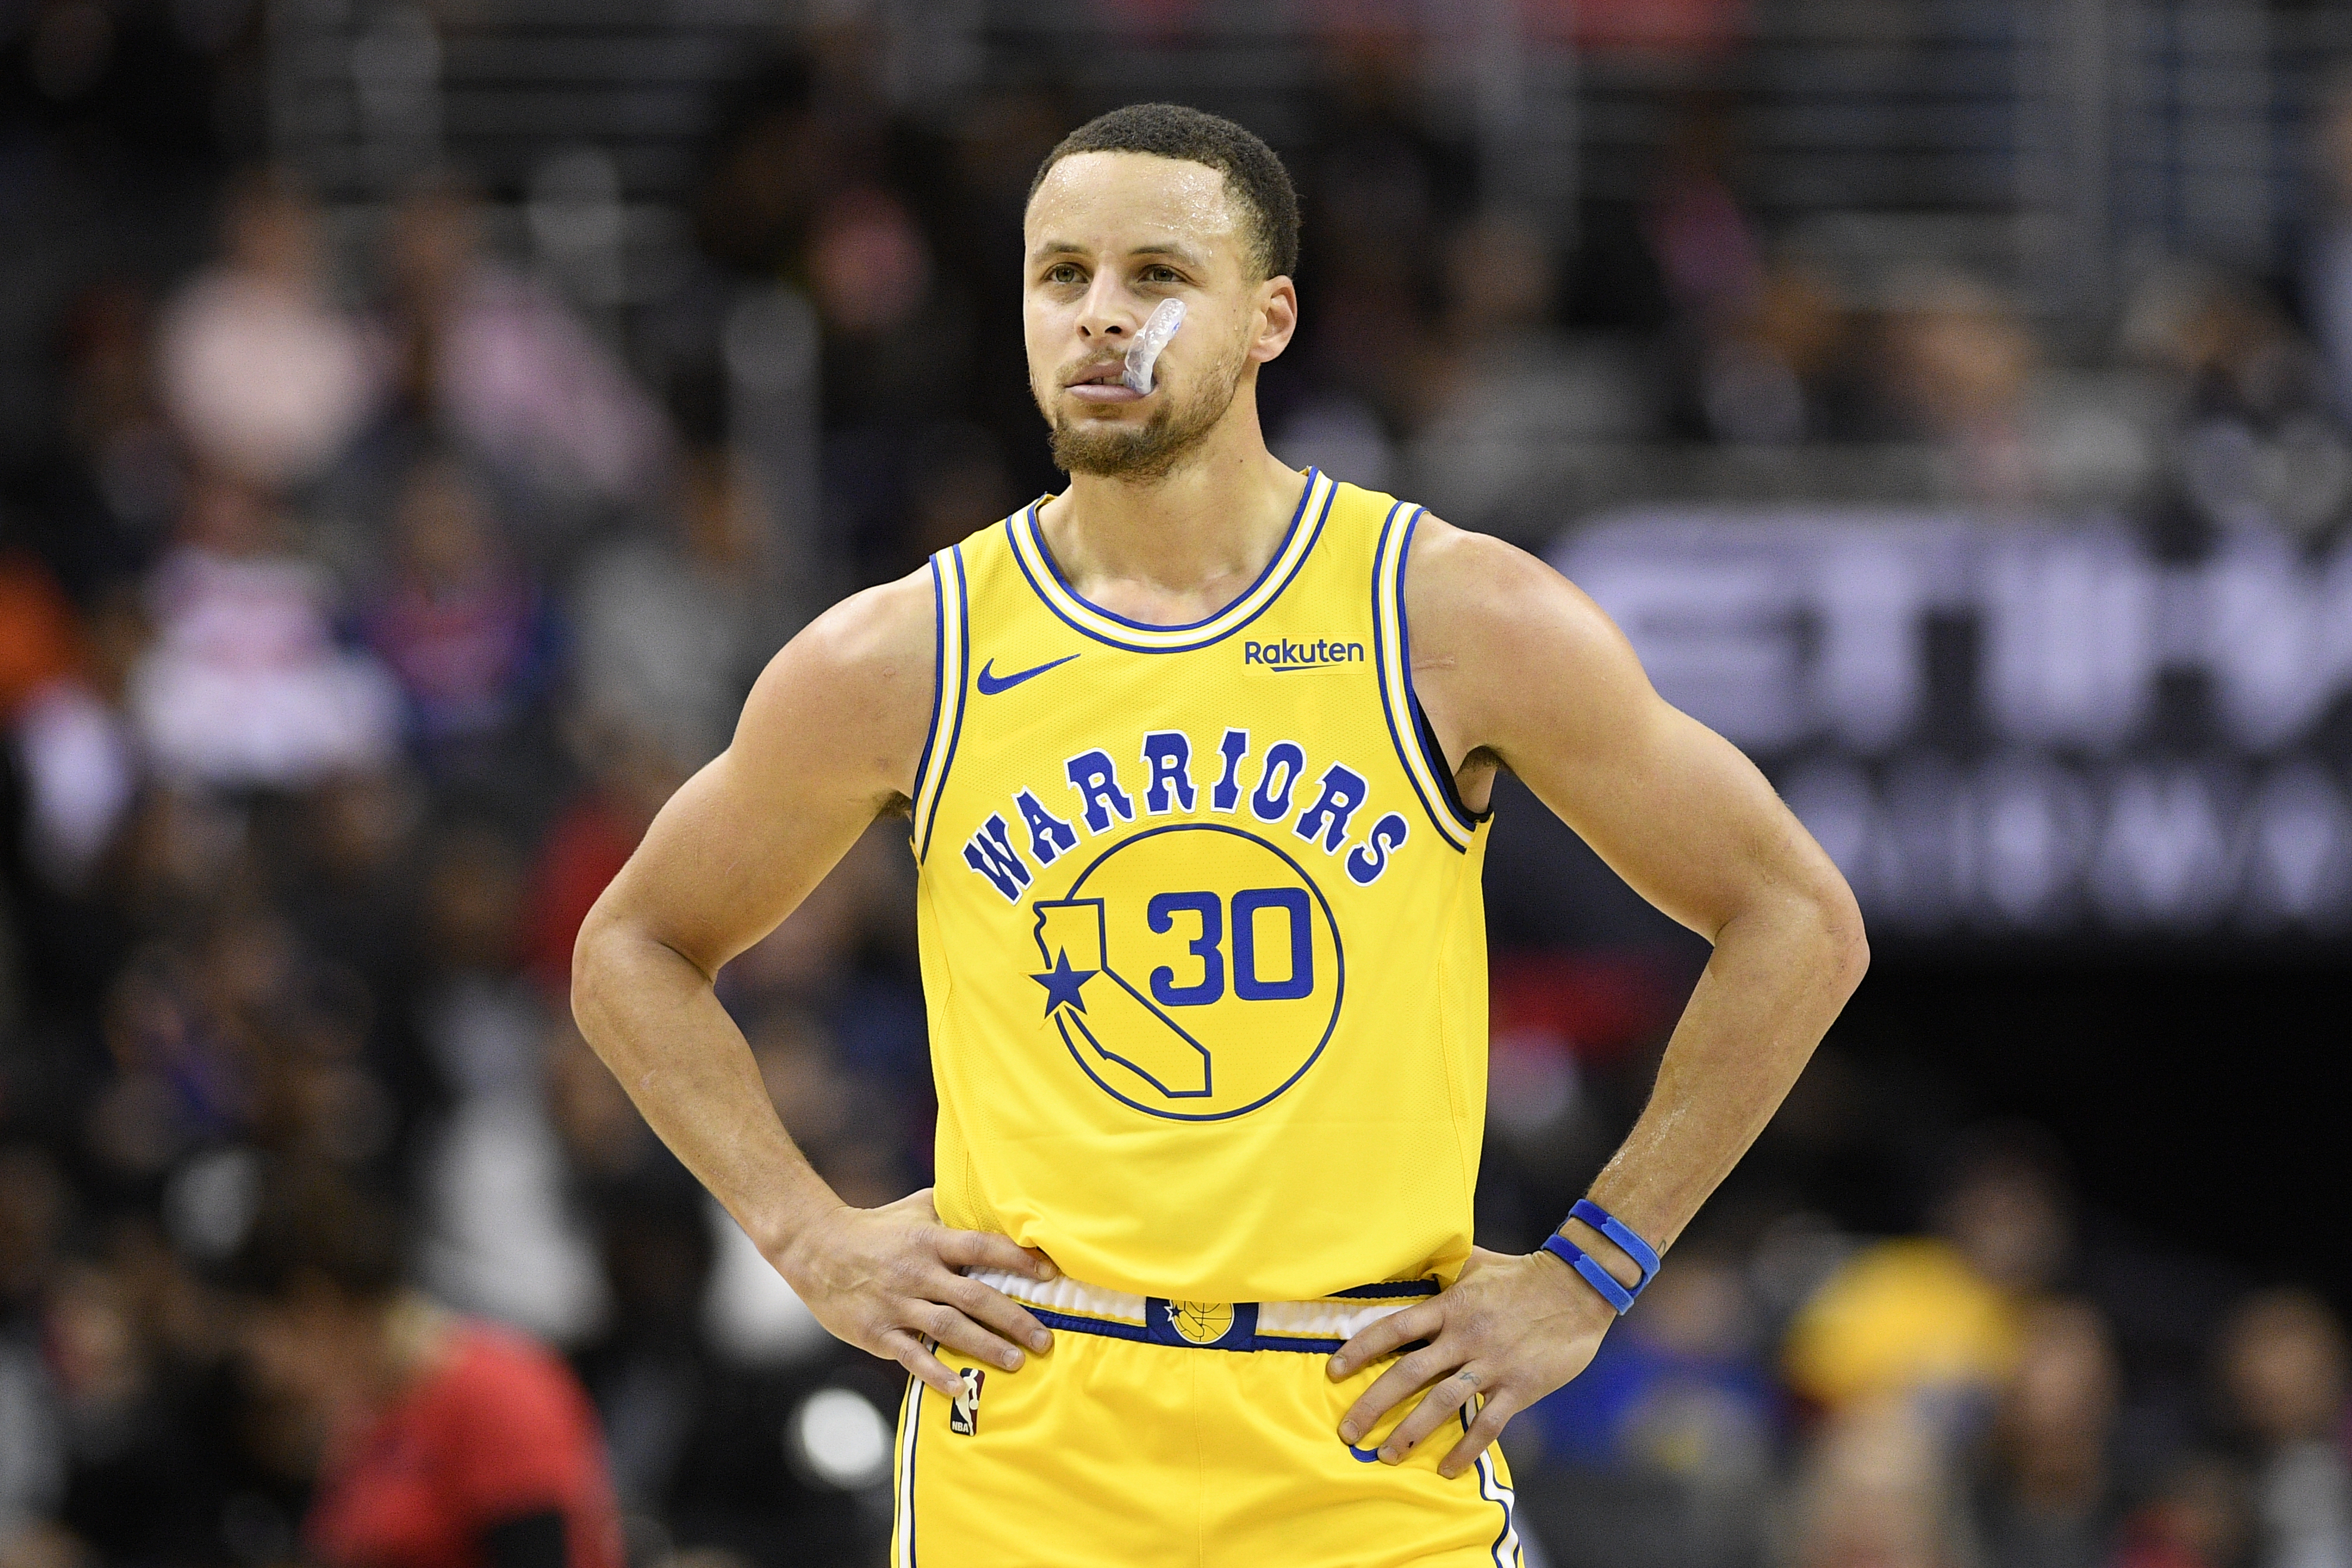 Golden State Warriors at Denver Nuggets free live stream (4/24/22) How to watch Game 4 of NBA playoff series, channel, time